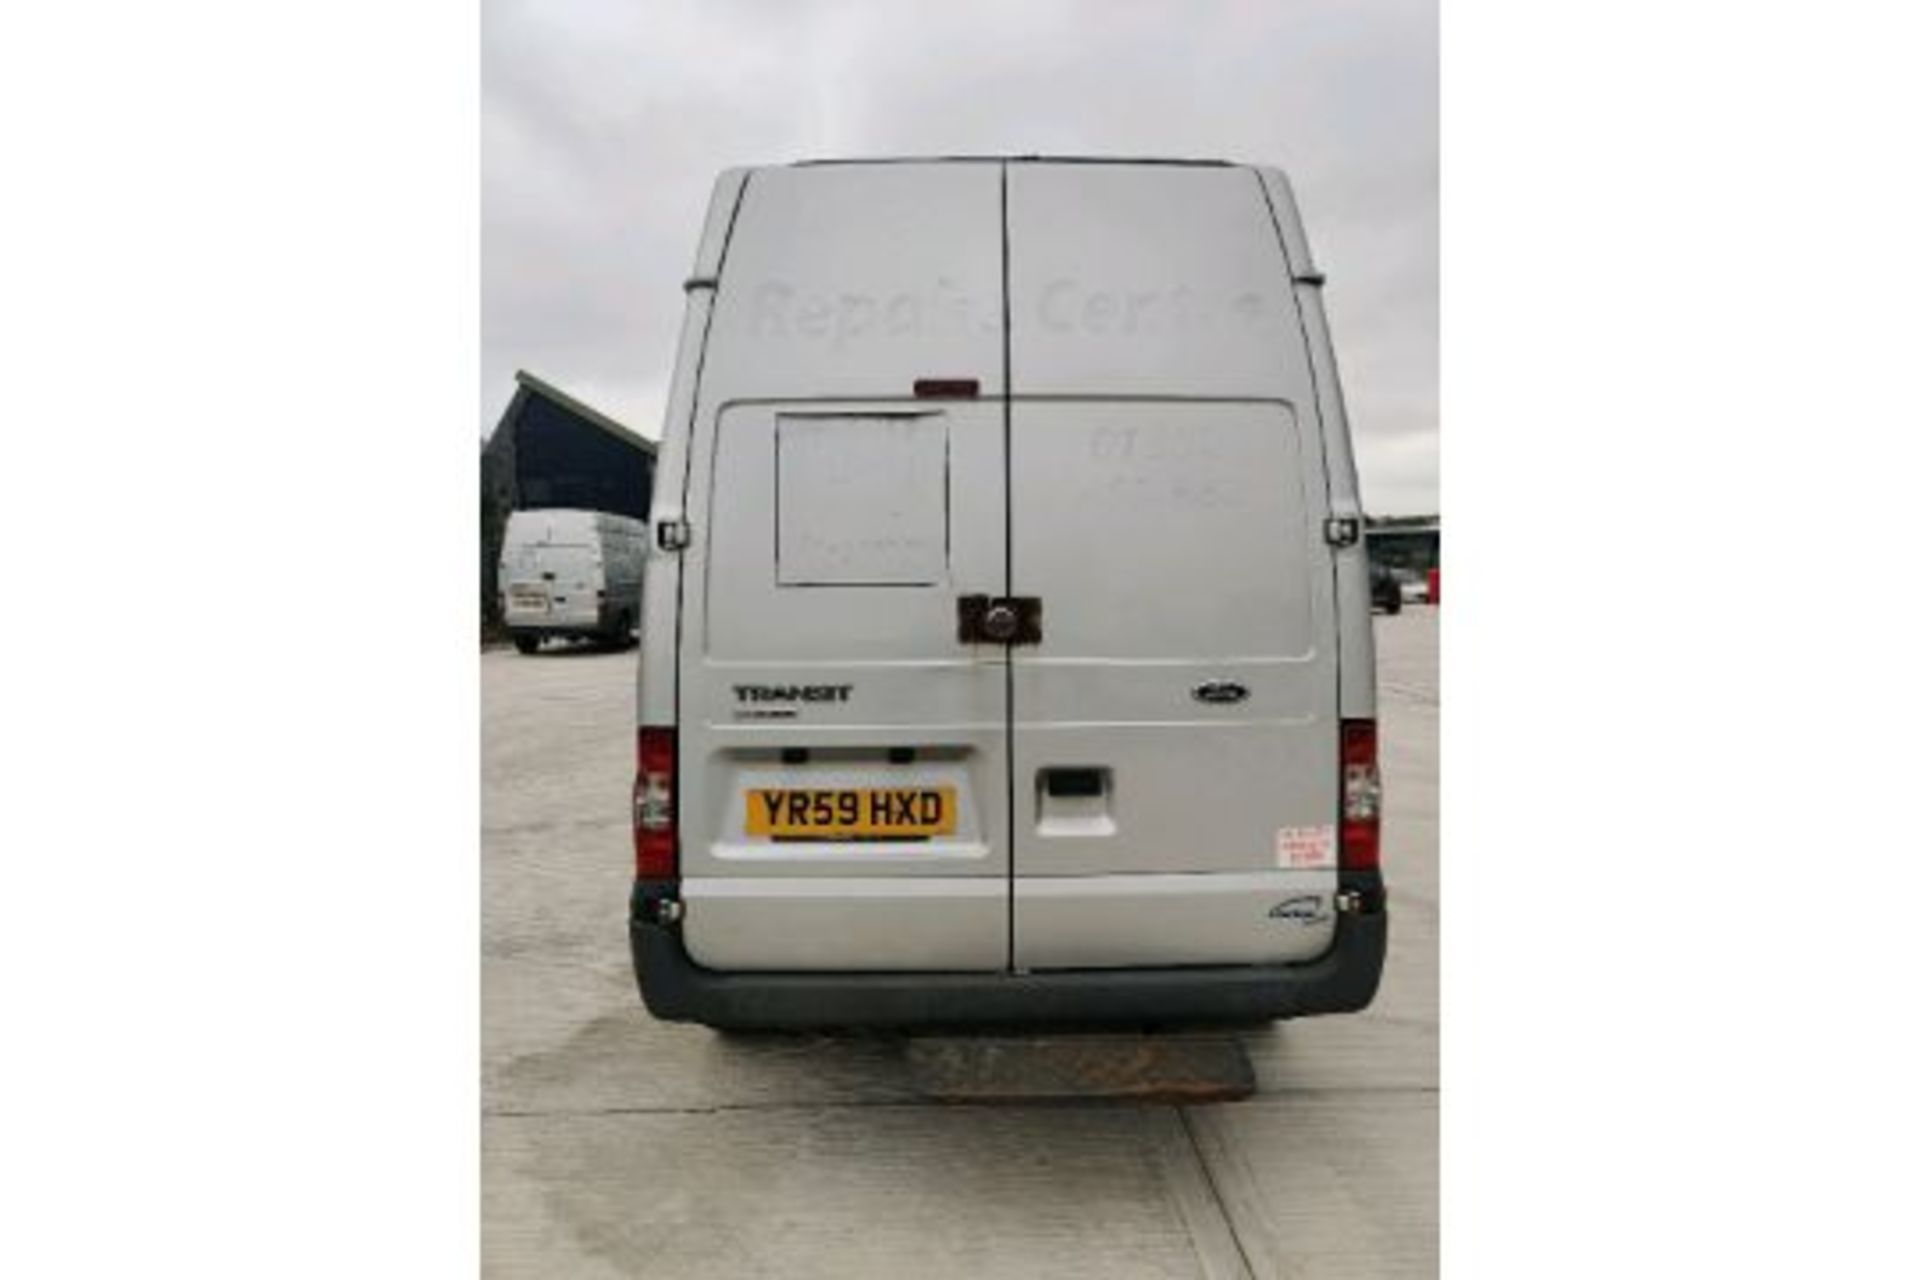 ENTRY DIRECT FROM LOCAL AUTHORITY Ford Transit 115 - Image 3 of 21